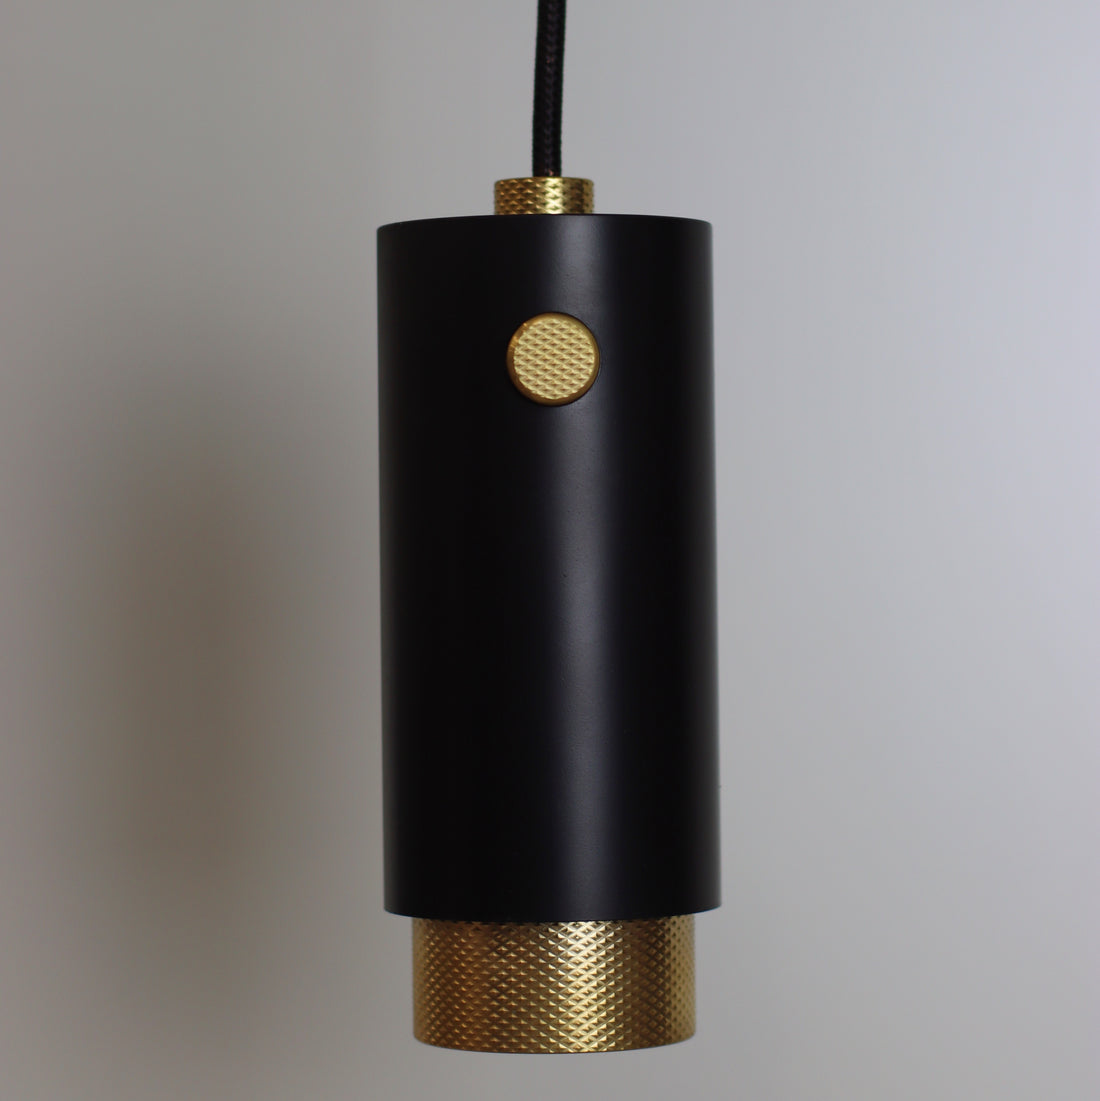 pendant light from ceiling with fabric cable and solid brass accents. knurled brass. black cerakote paint light body. knurled decor. 